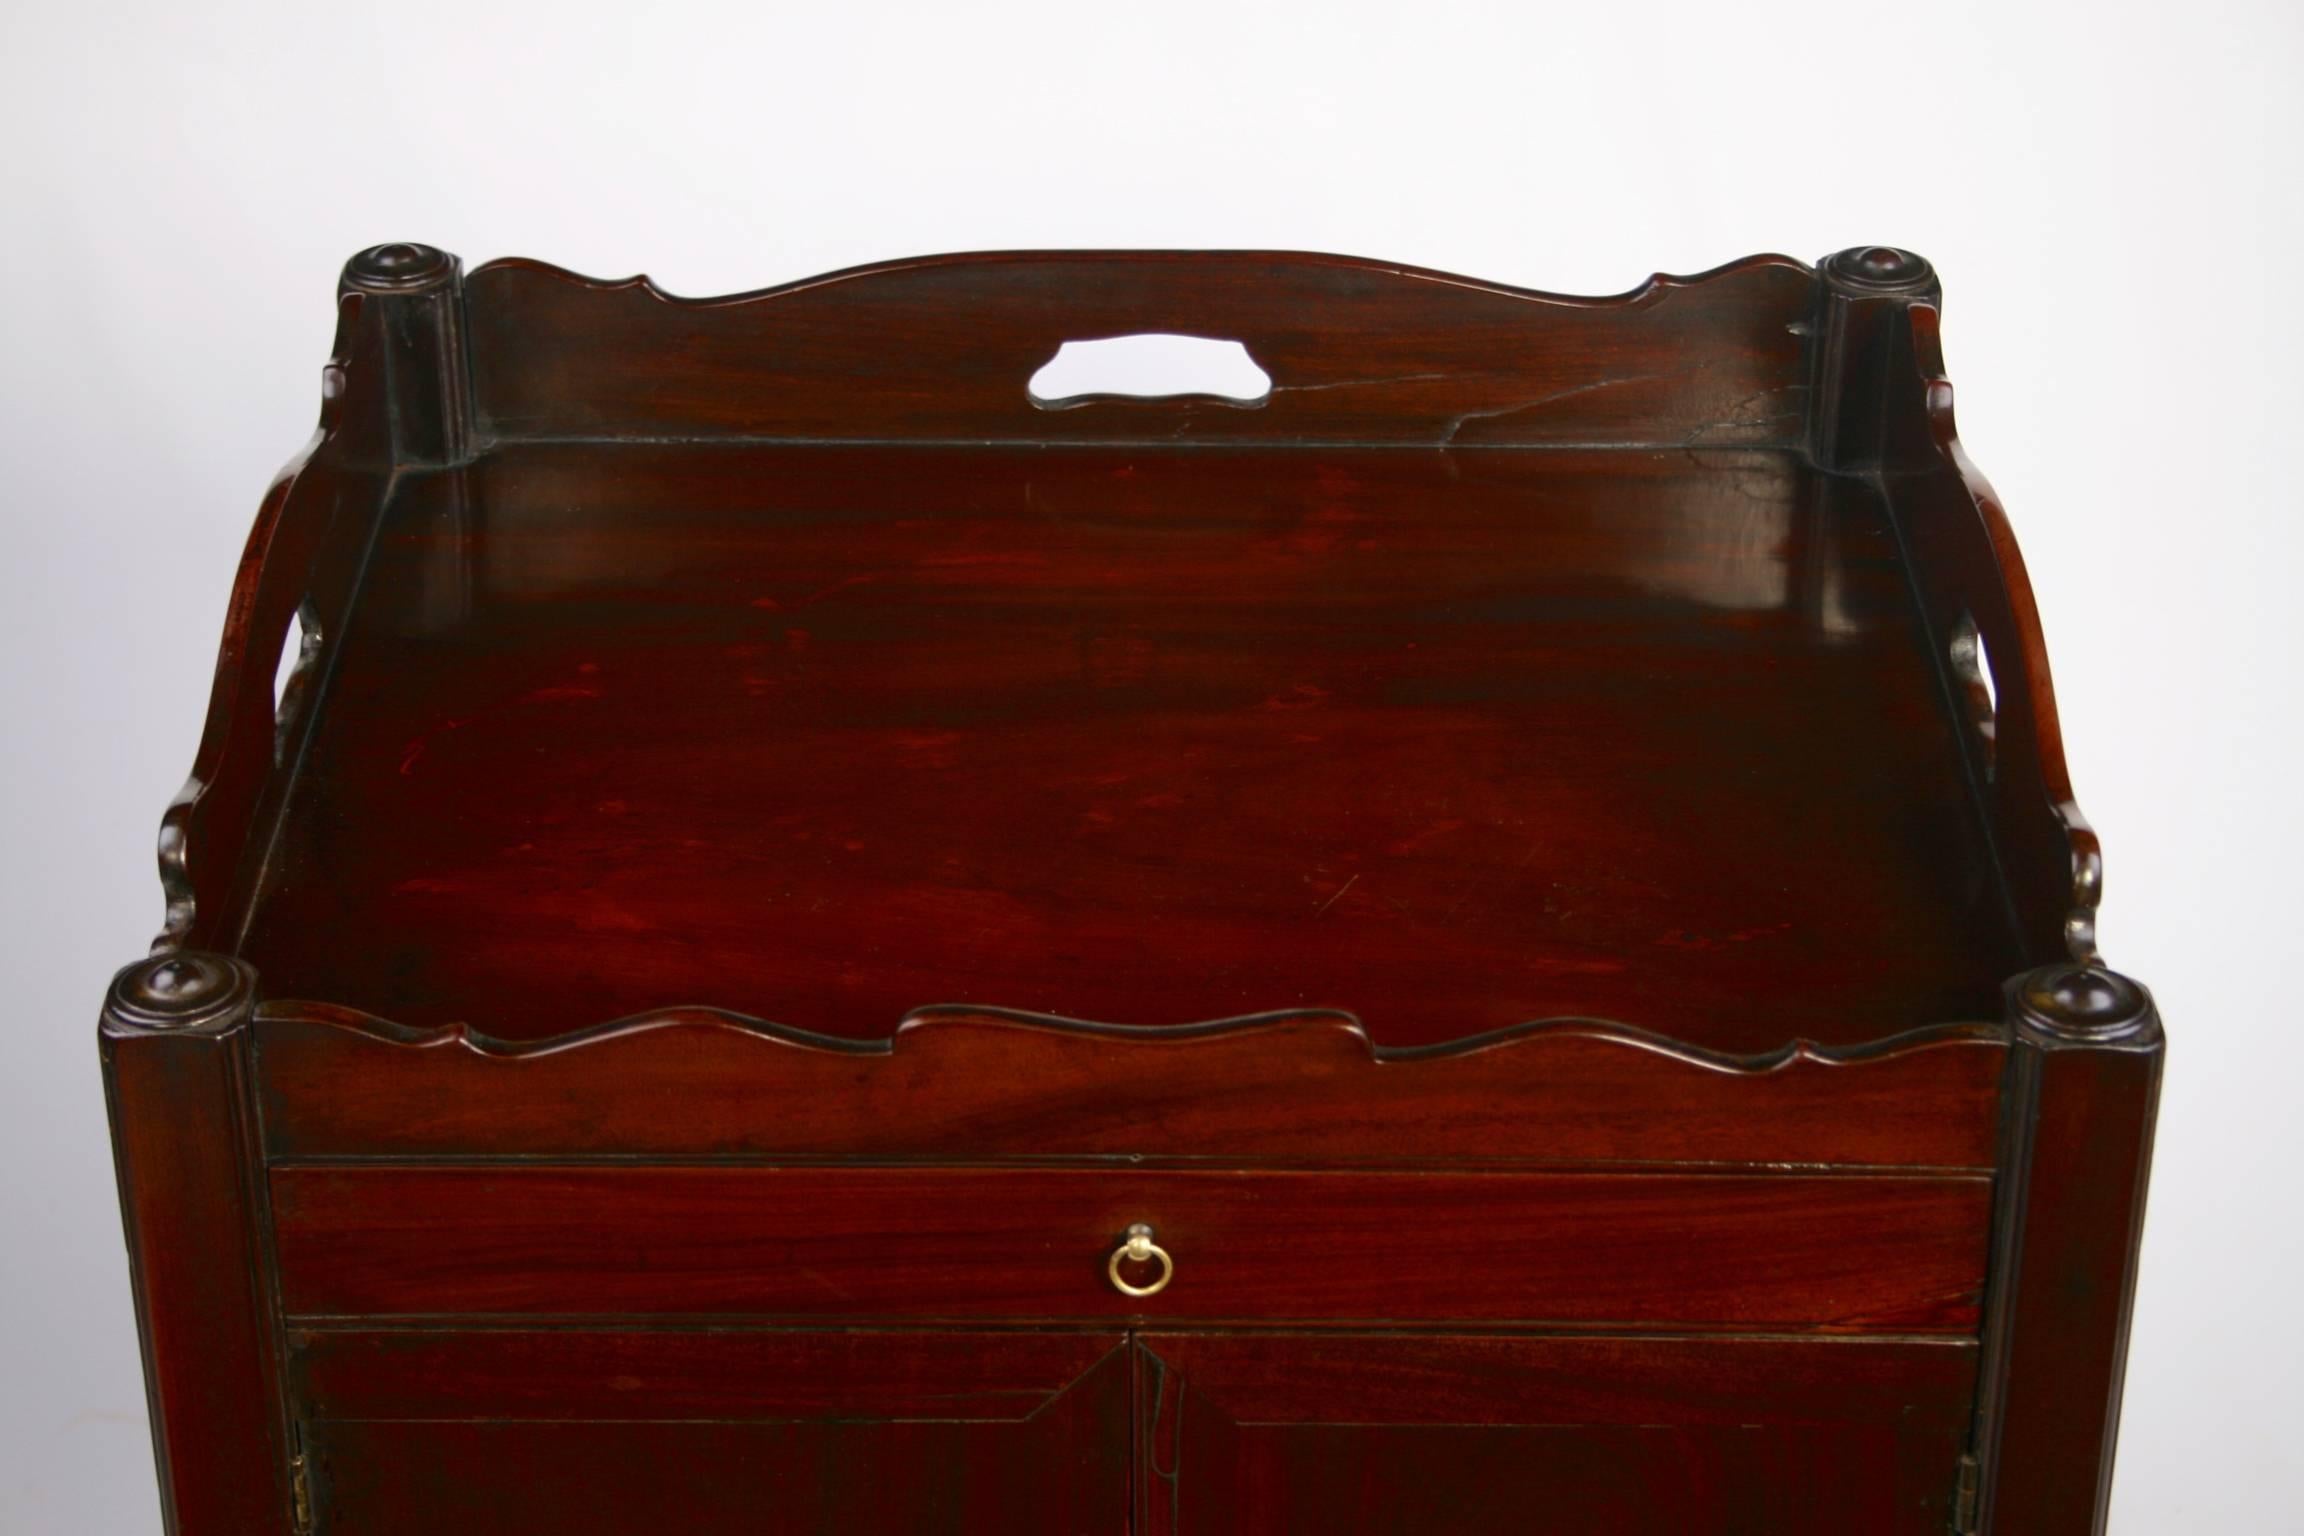 A mid eighteenth century night table contructed from excellent quality mahogany. Having a shaped gallery tray top above a straight front fitted with a single drawer and above two hinged doors. The base consists of a pull out drawer with a boarded